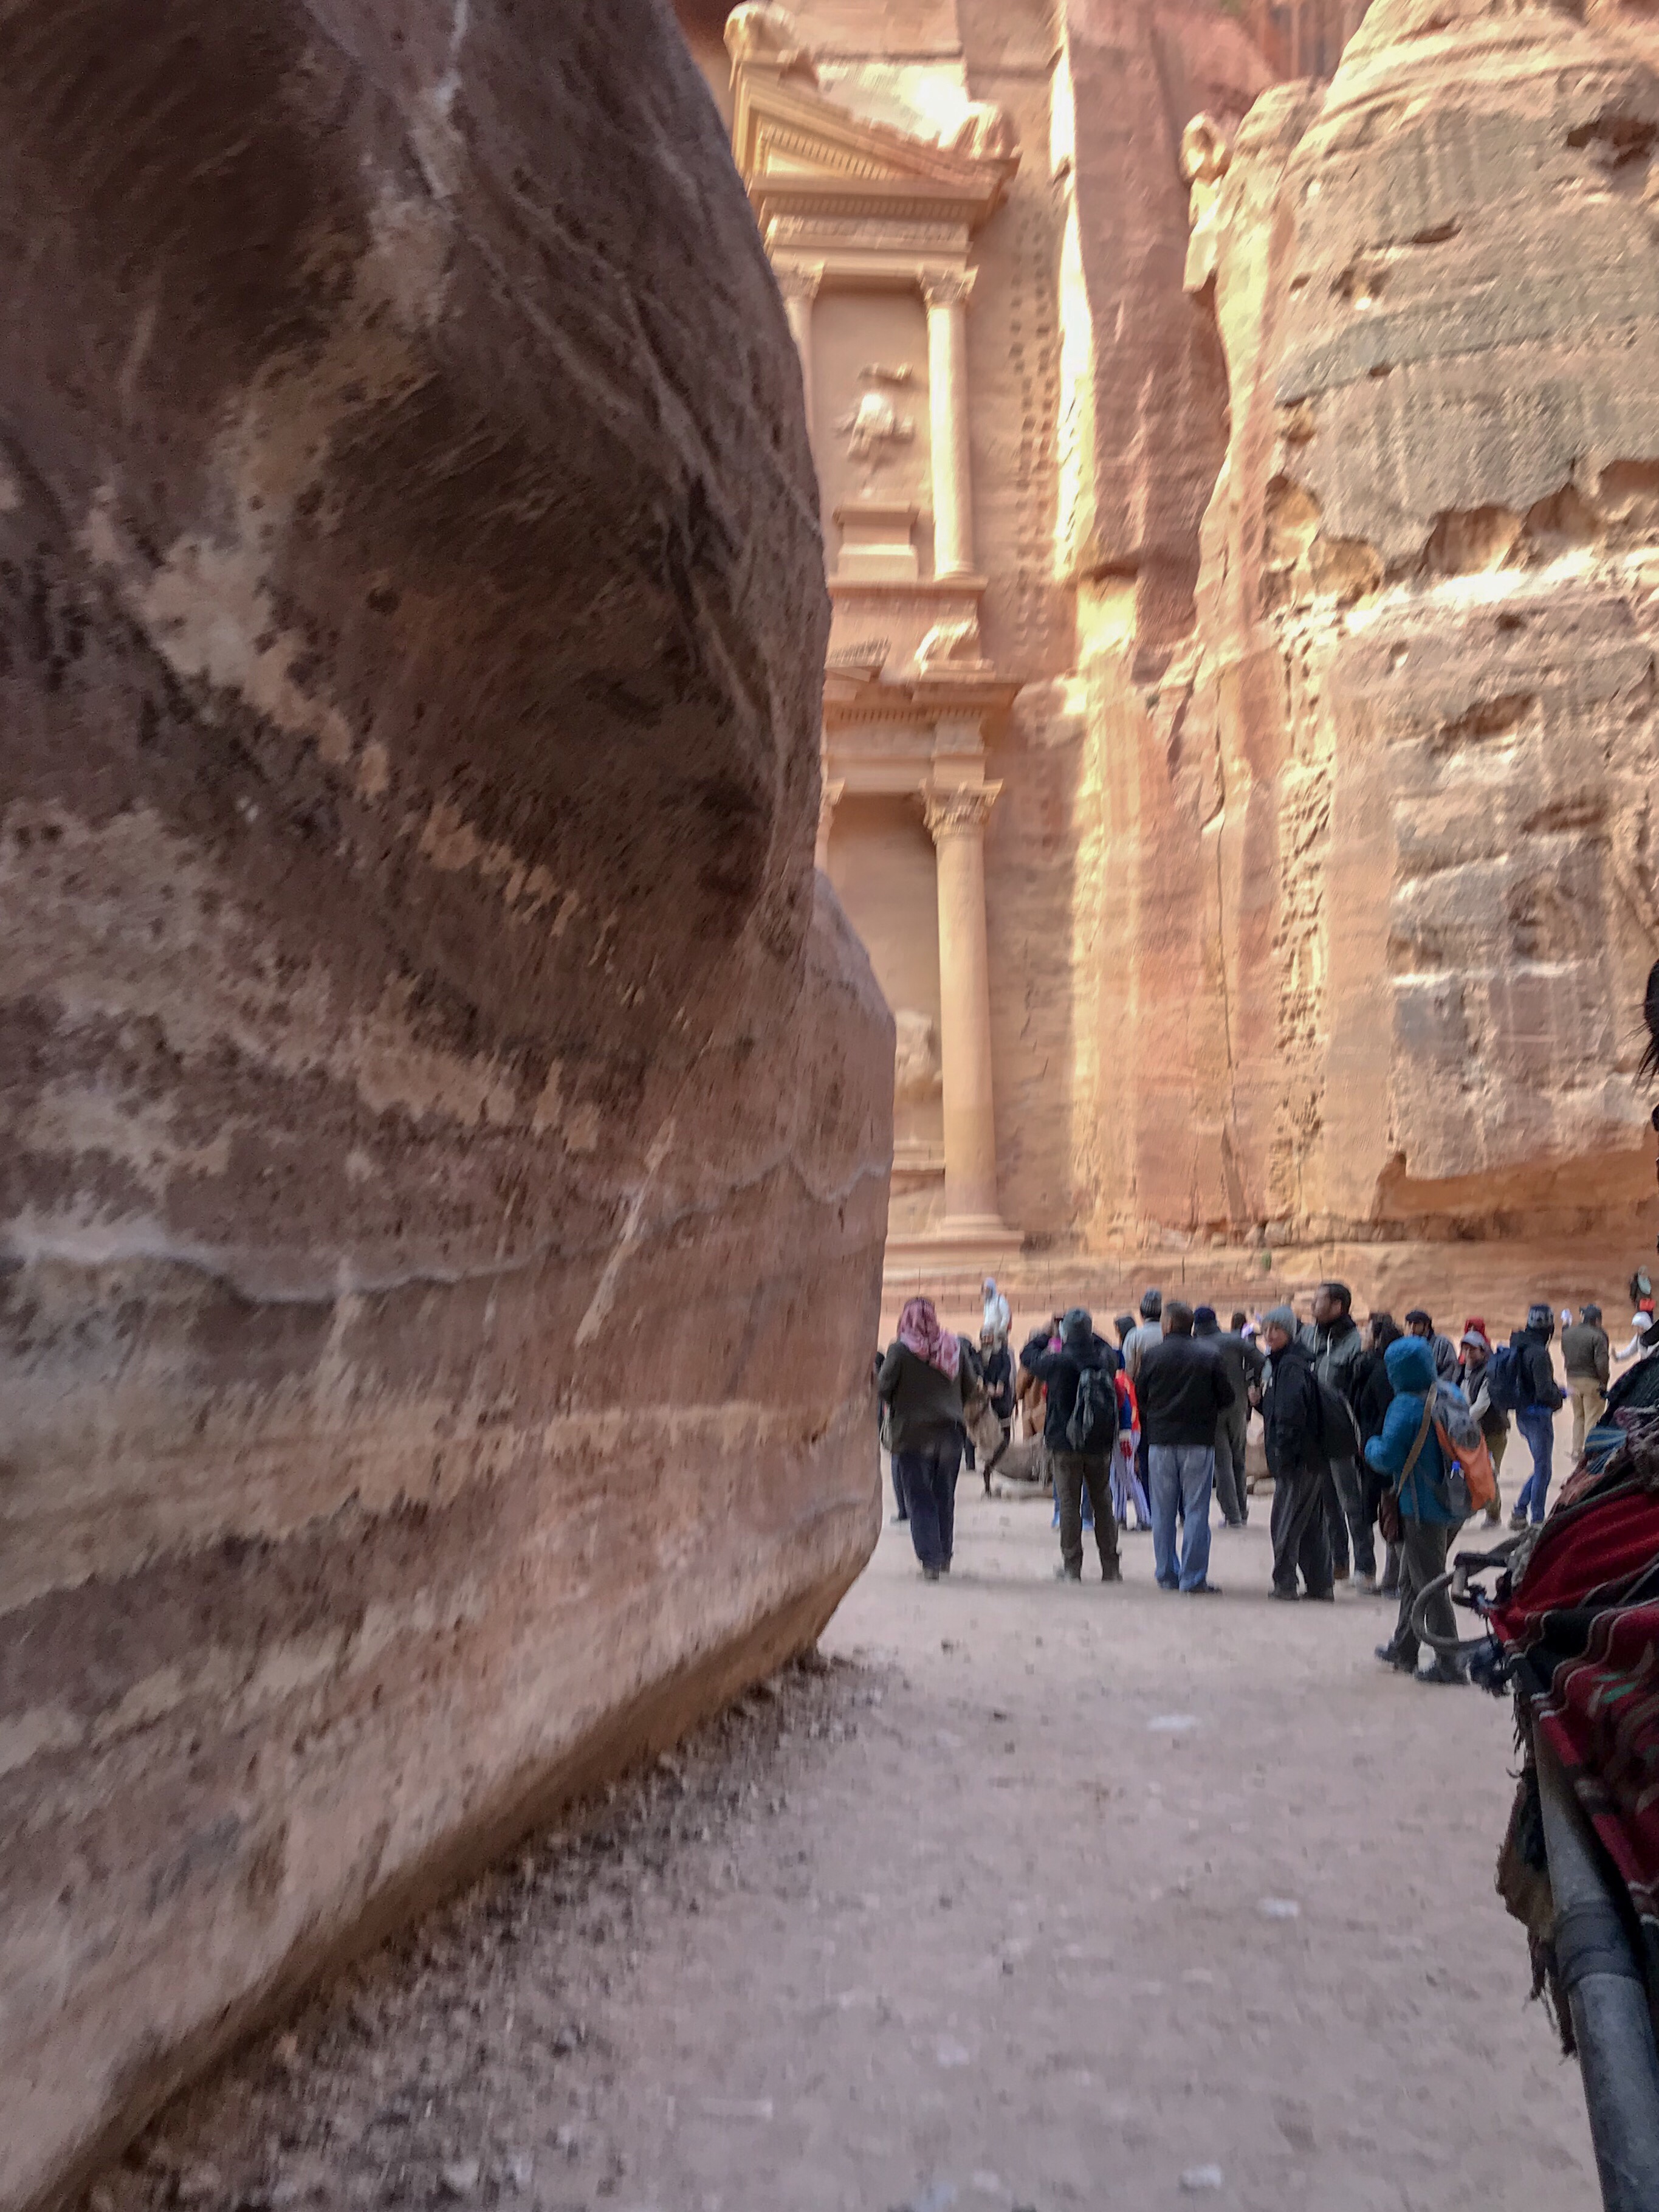 A snatched view of the Treasury as we rounded the last corner of the Siq